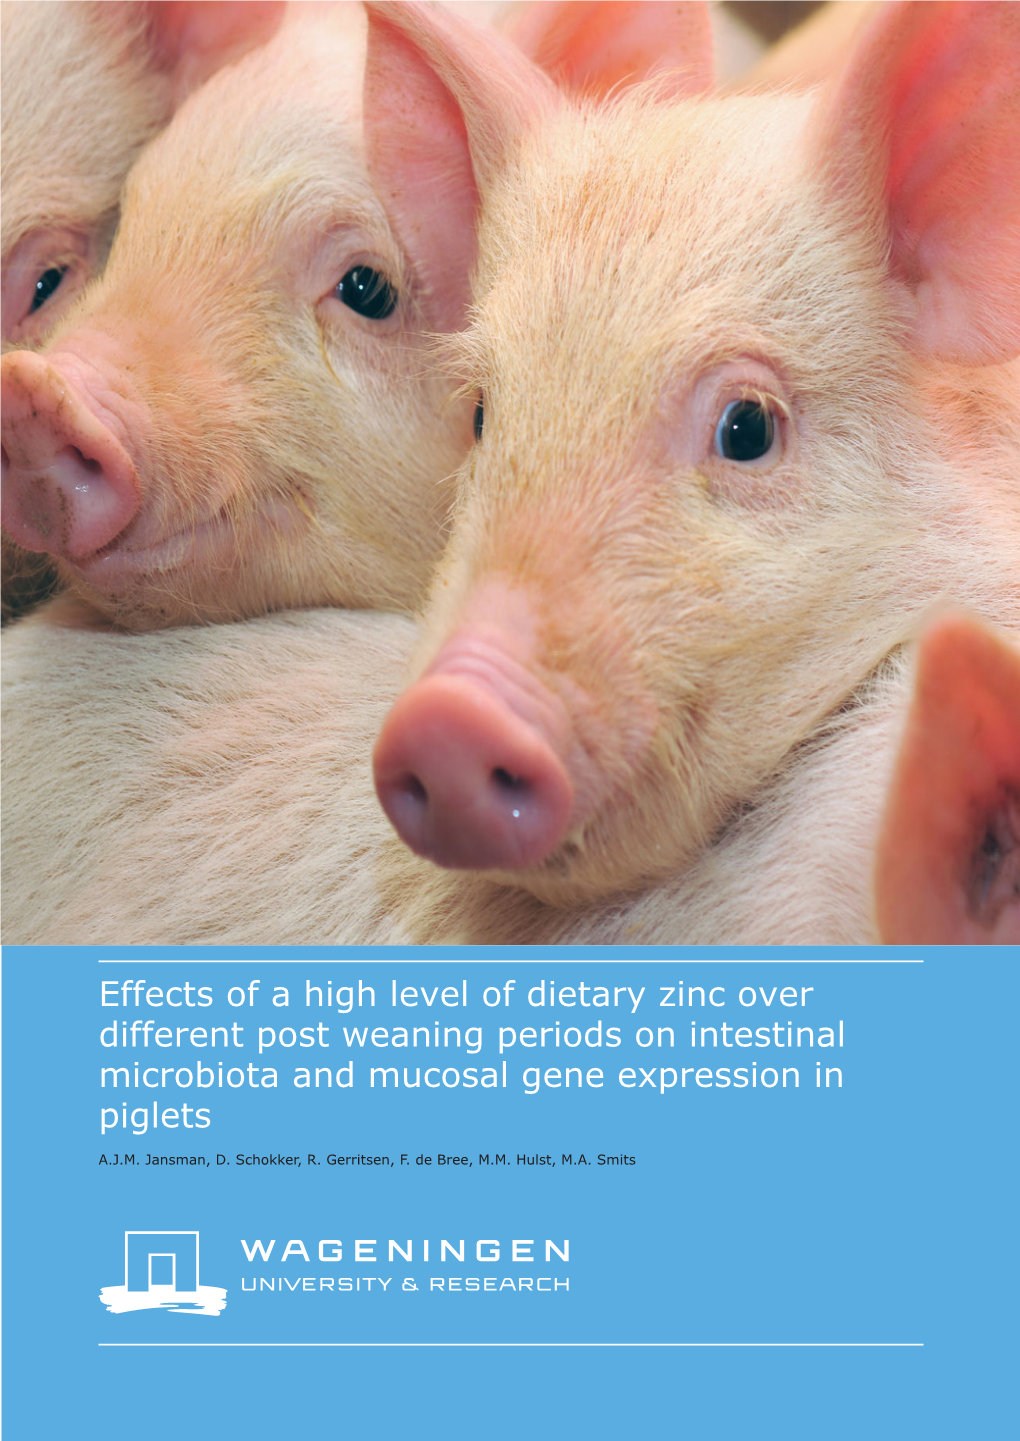 Effects of a High Level of Dietary Zinc Over Different Post Weaning Periods on Intestinal Microbiota and Mucosal Gene Expression in Piglets